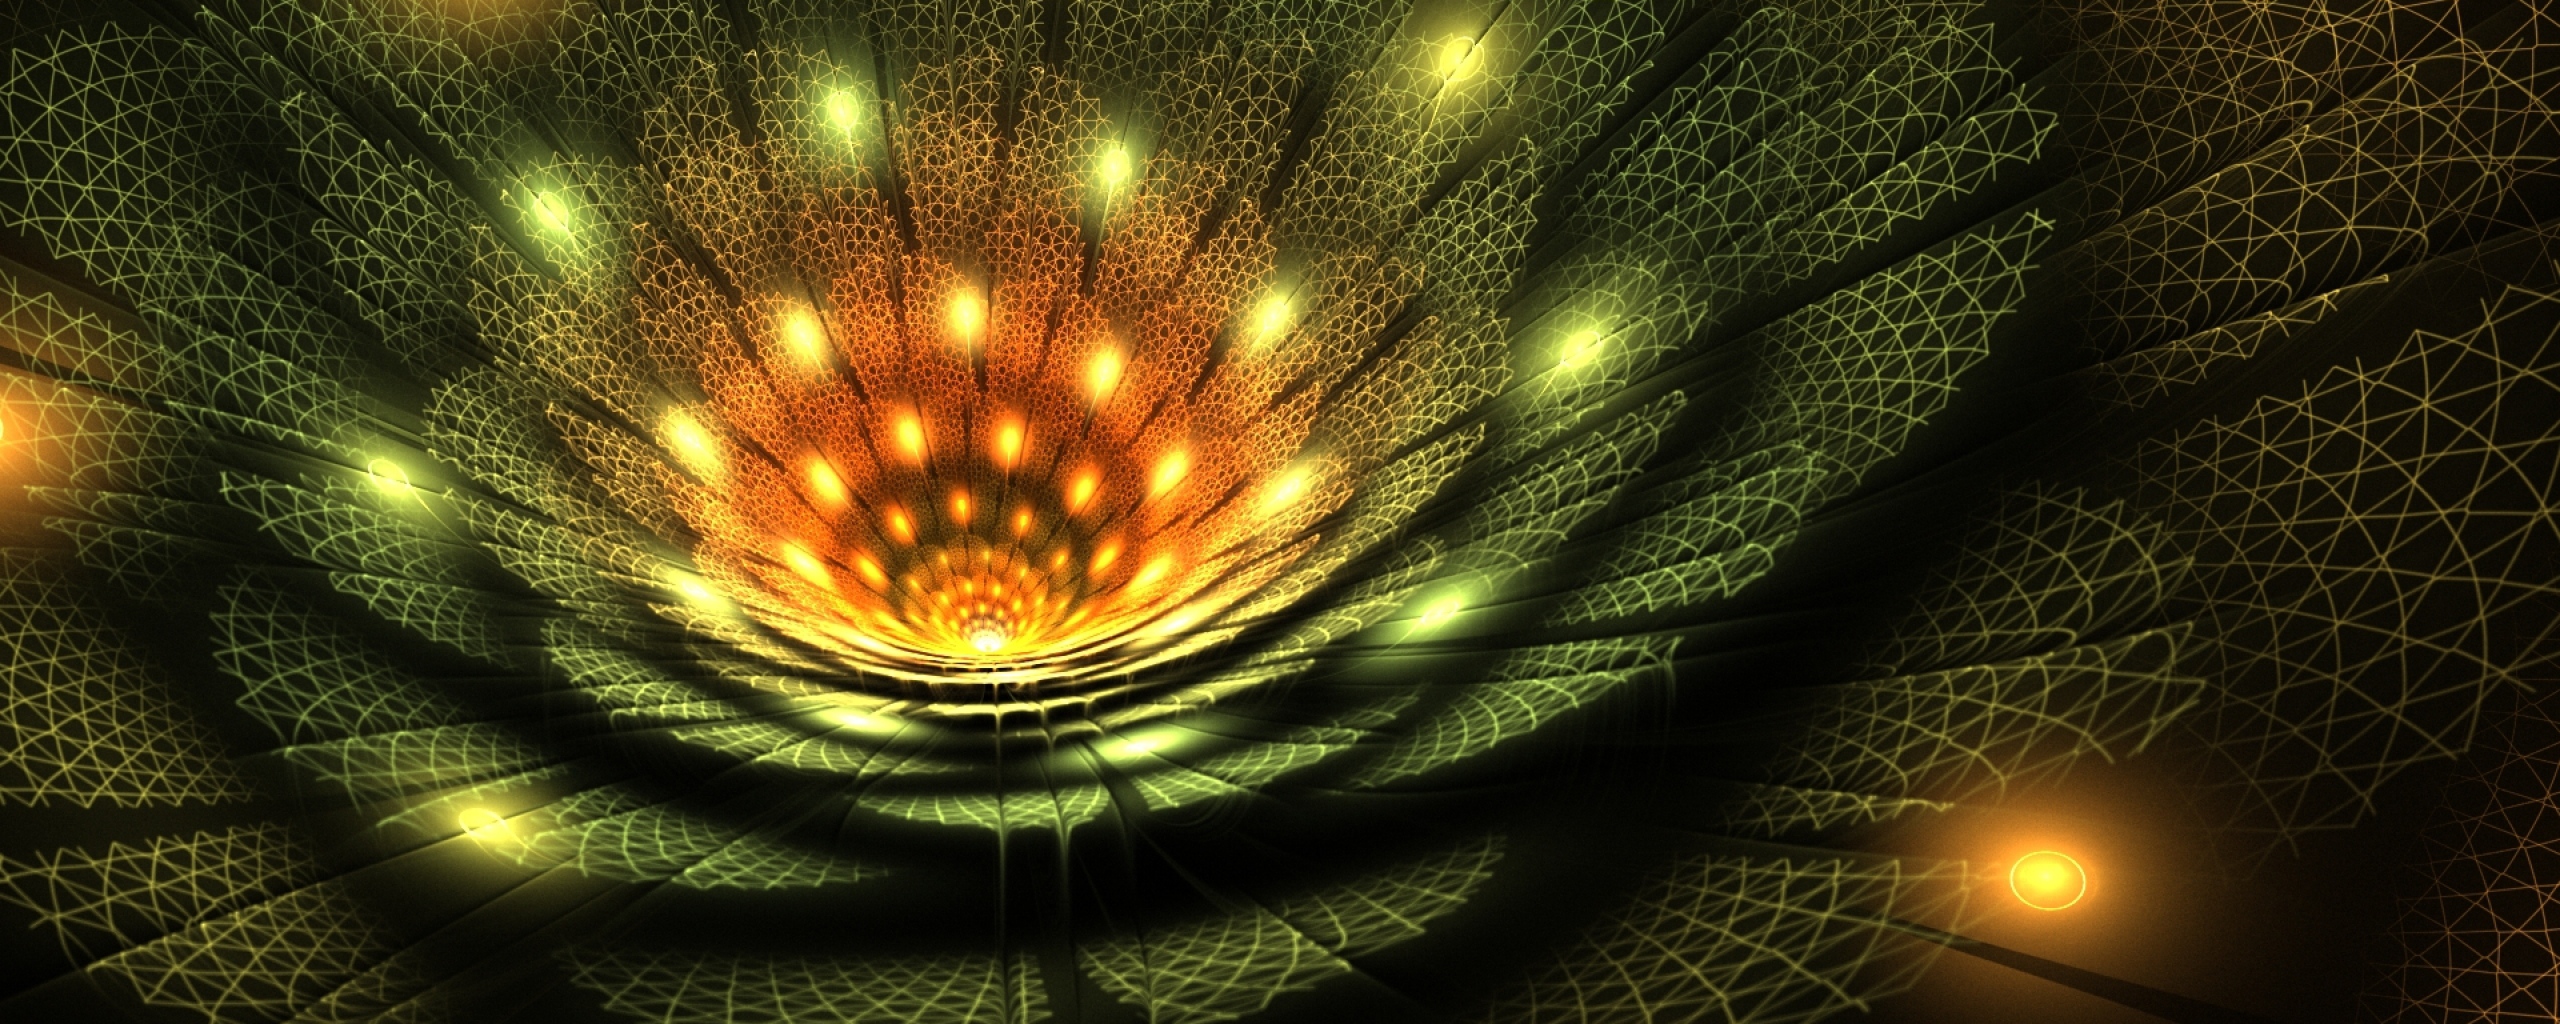 3d Abstract Fractal Wallpaper Background Dual Monitor Resolution